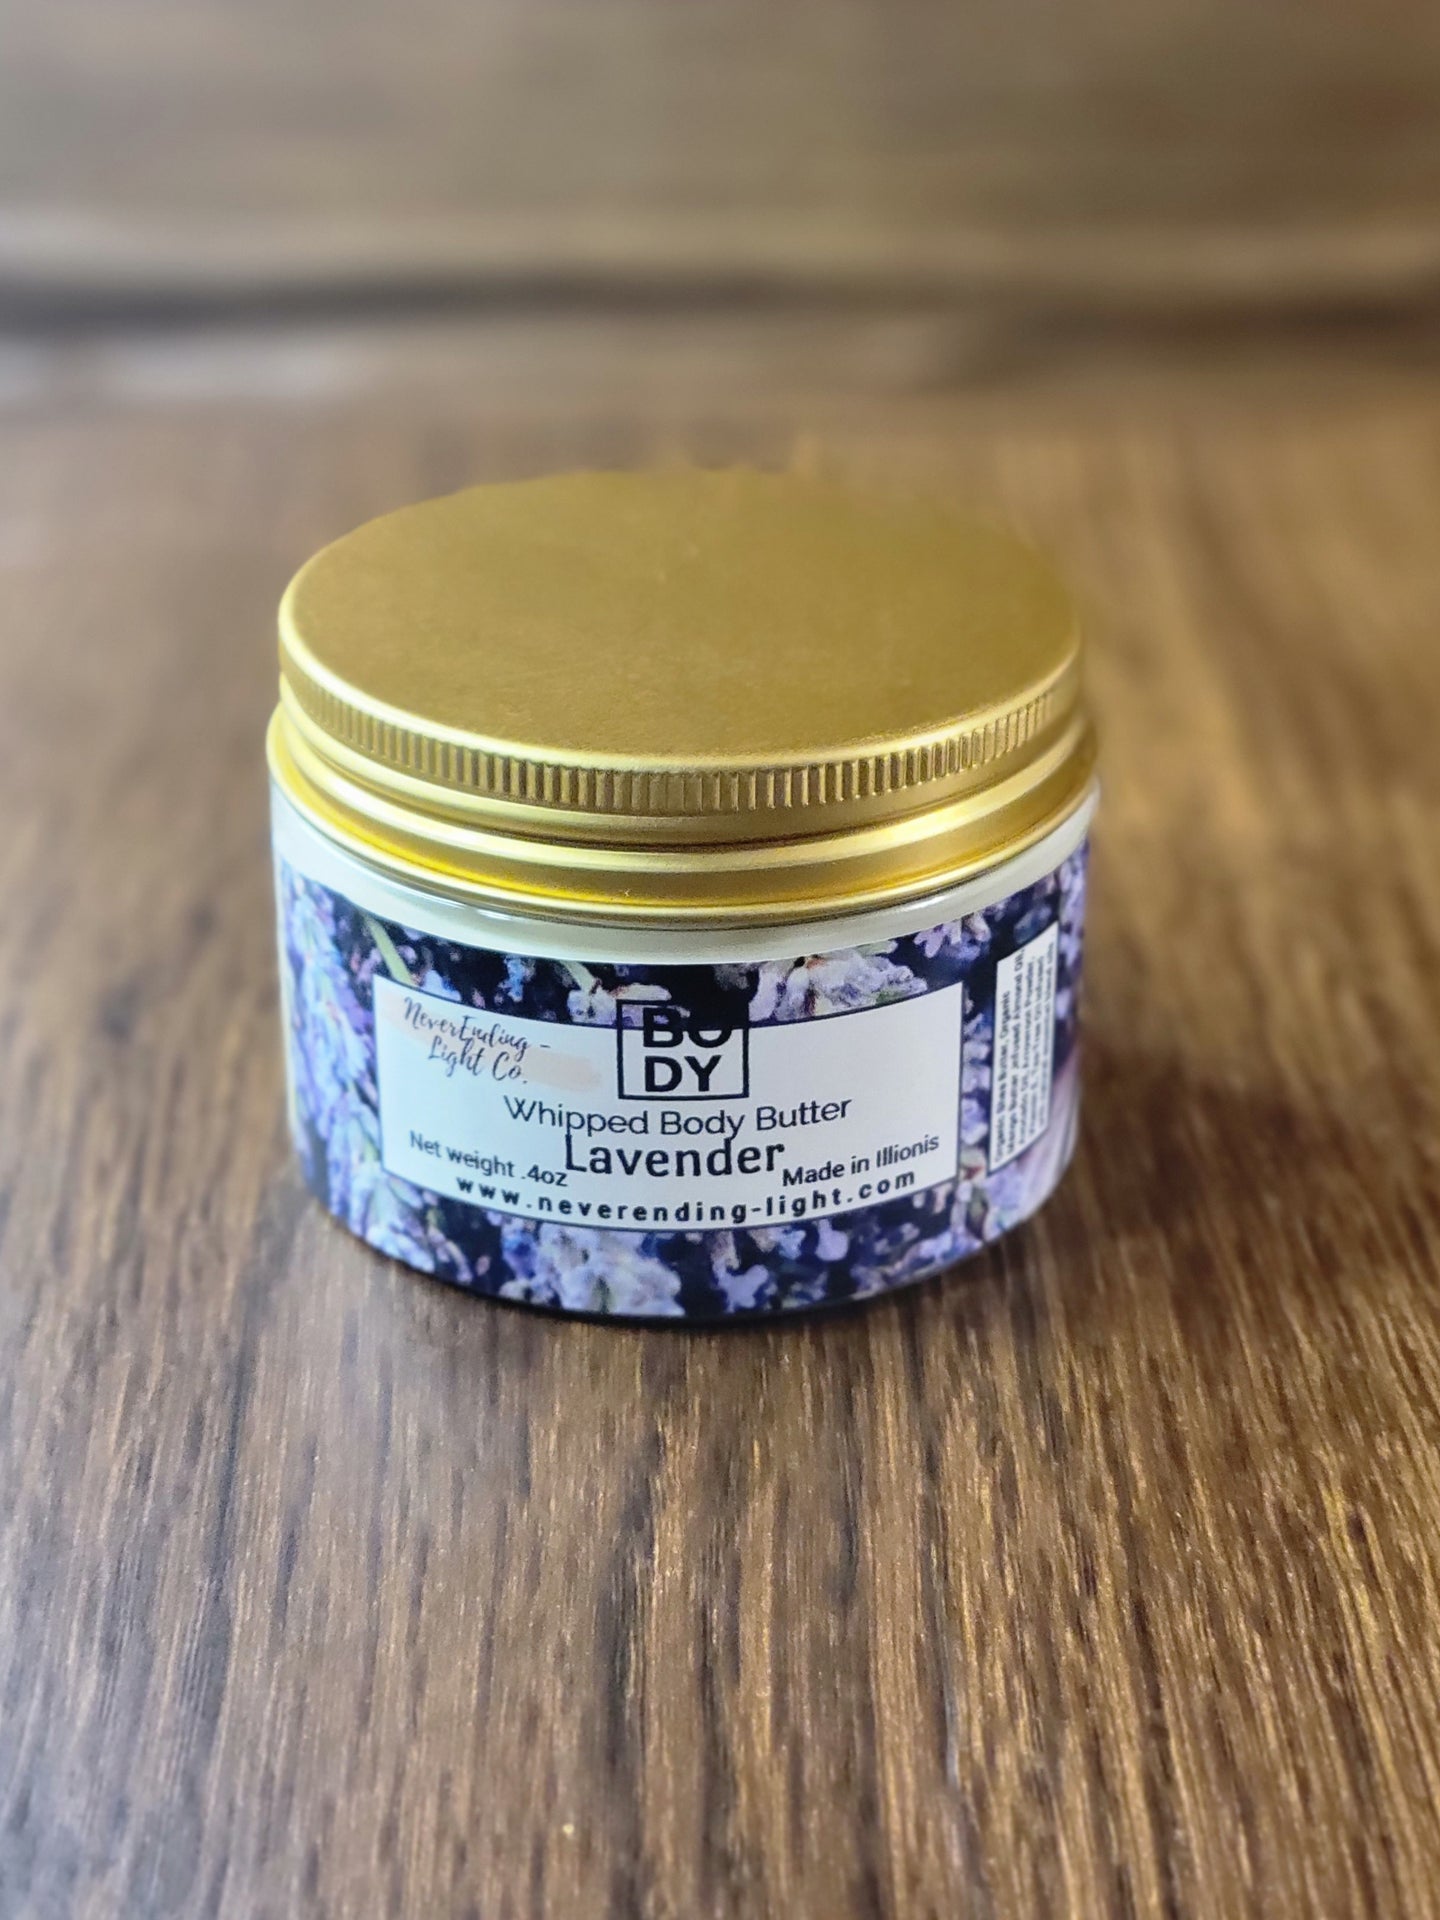 LAVENDER WHIPPED BODY BUTTER 4OZ